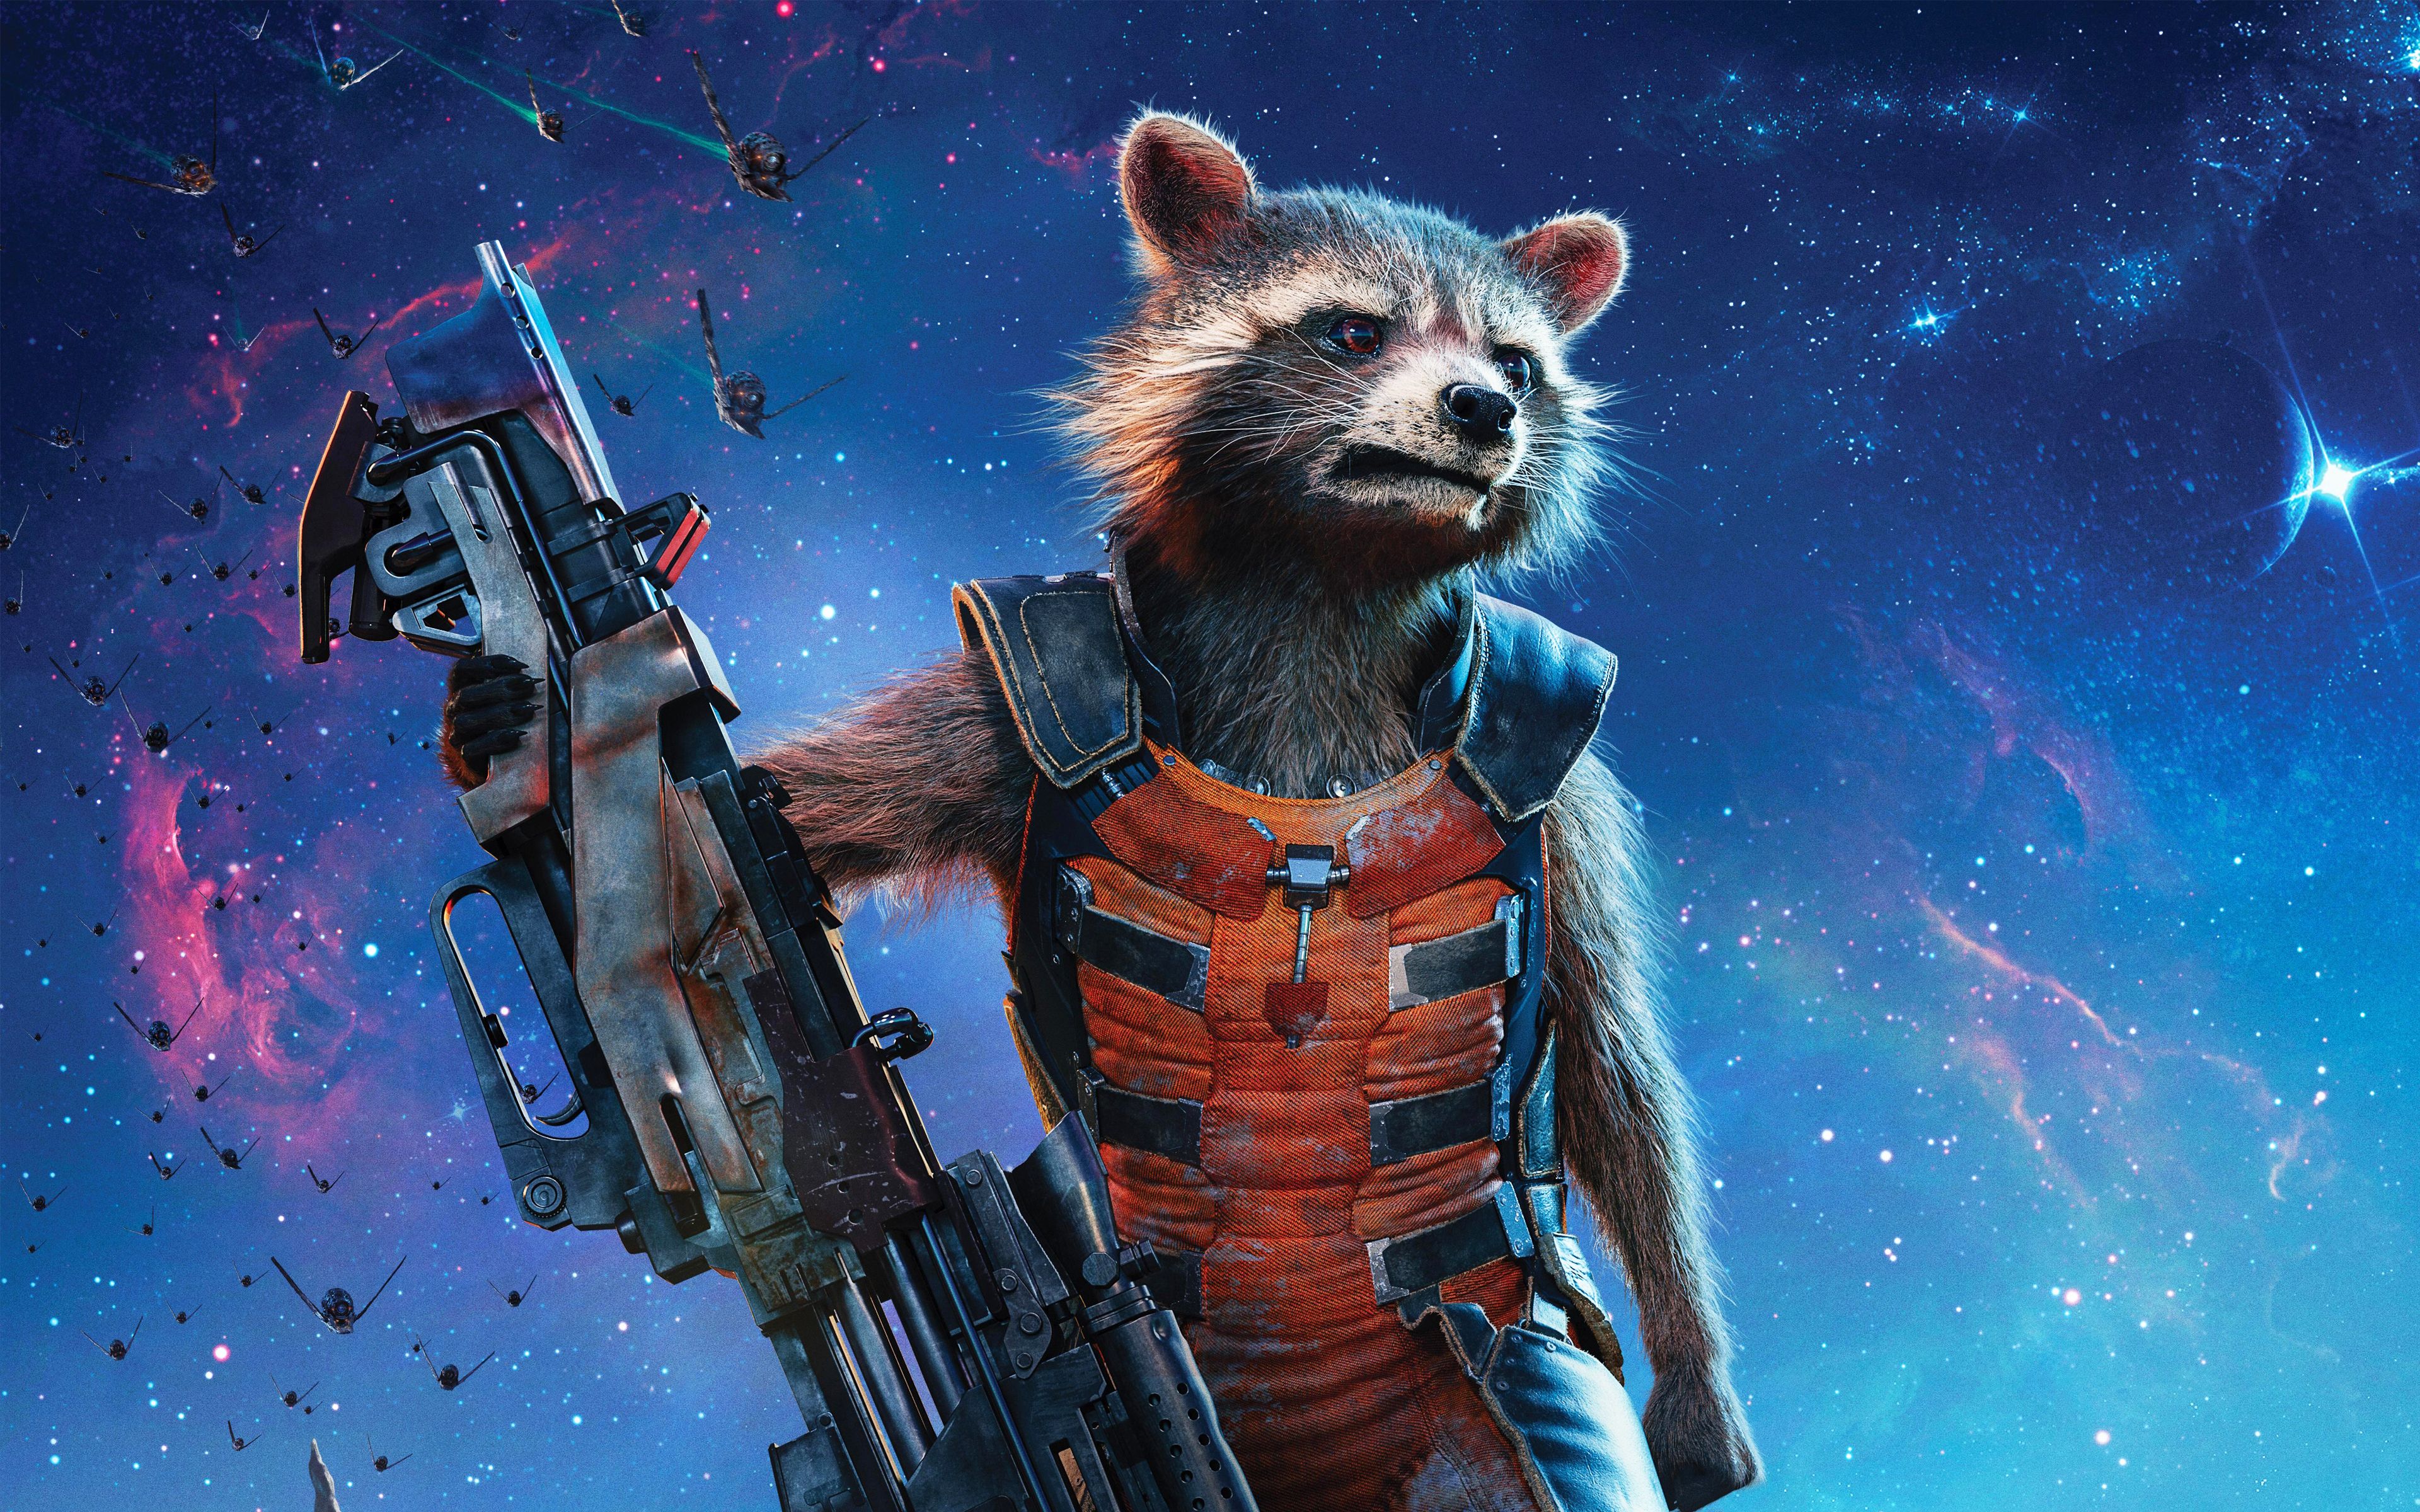 Guardians Of The Galaxy Vol 2 Artwork Wallpapers